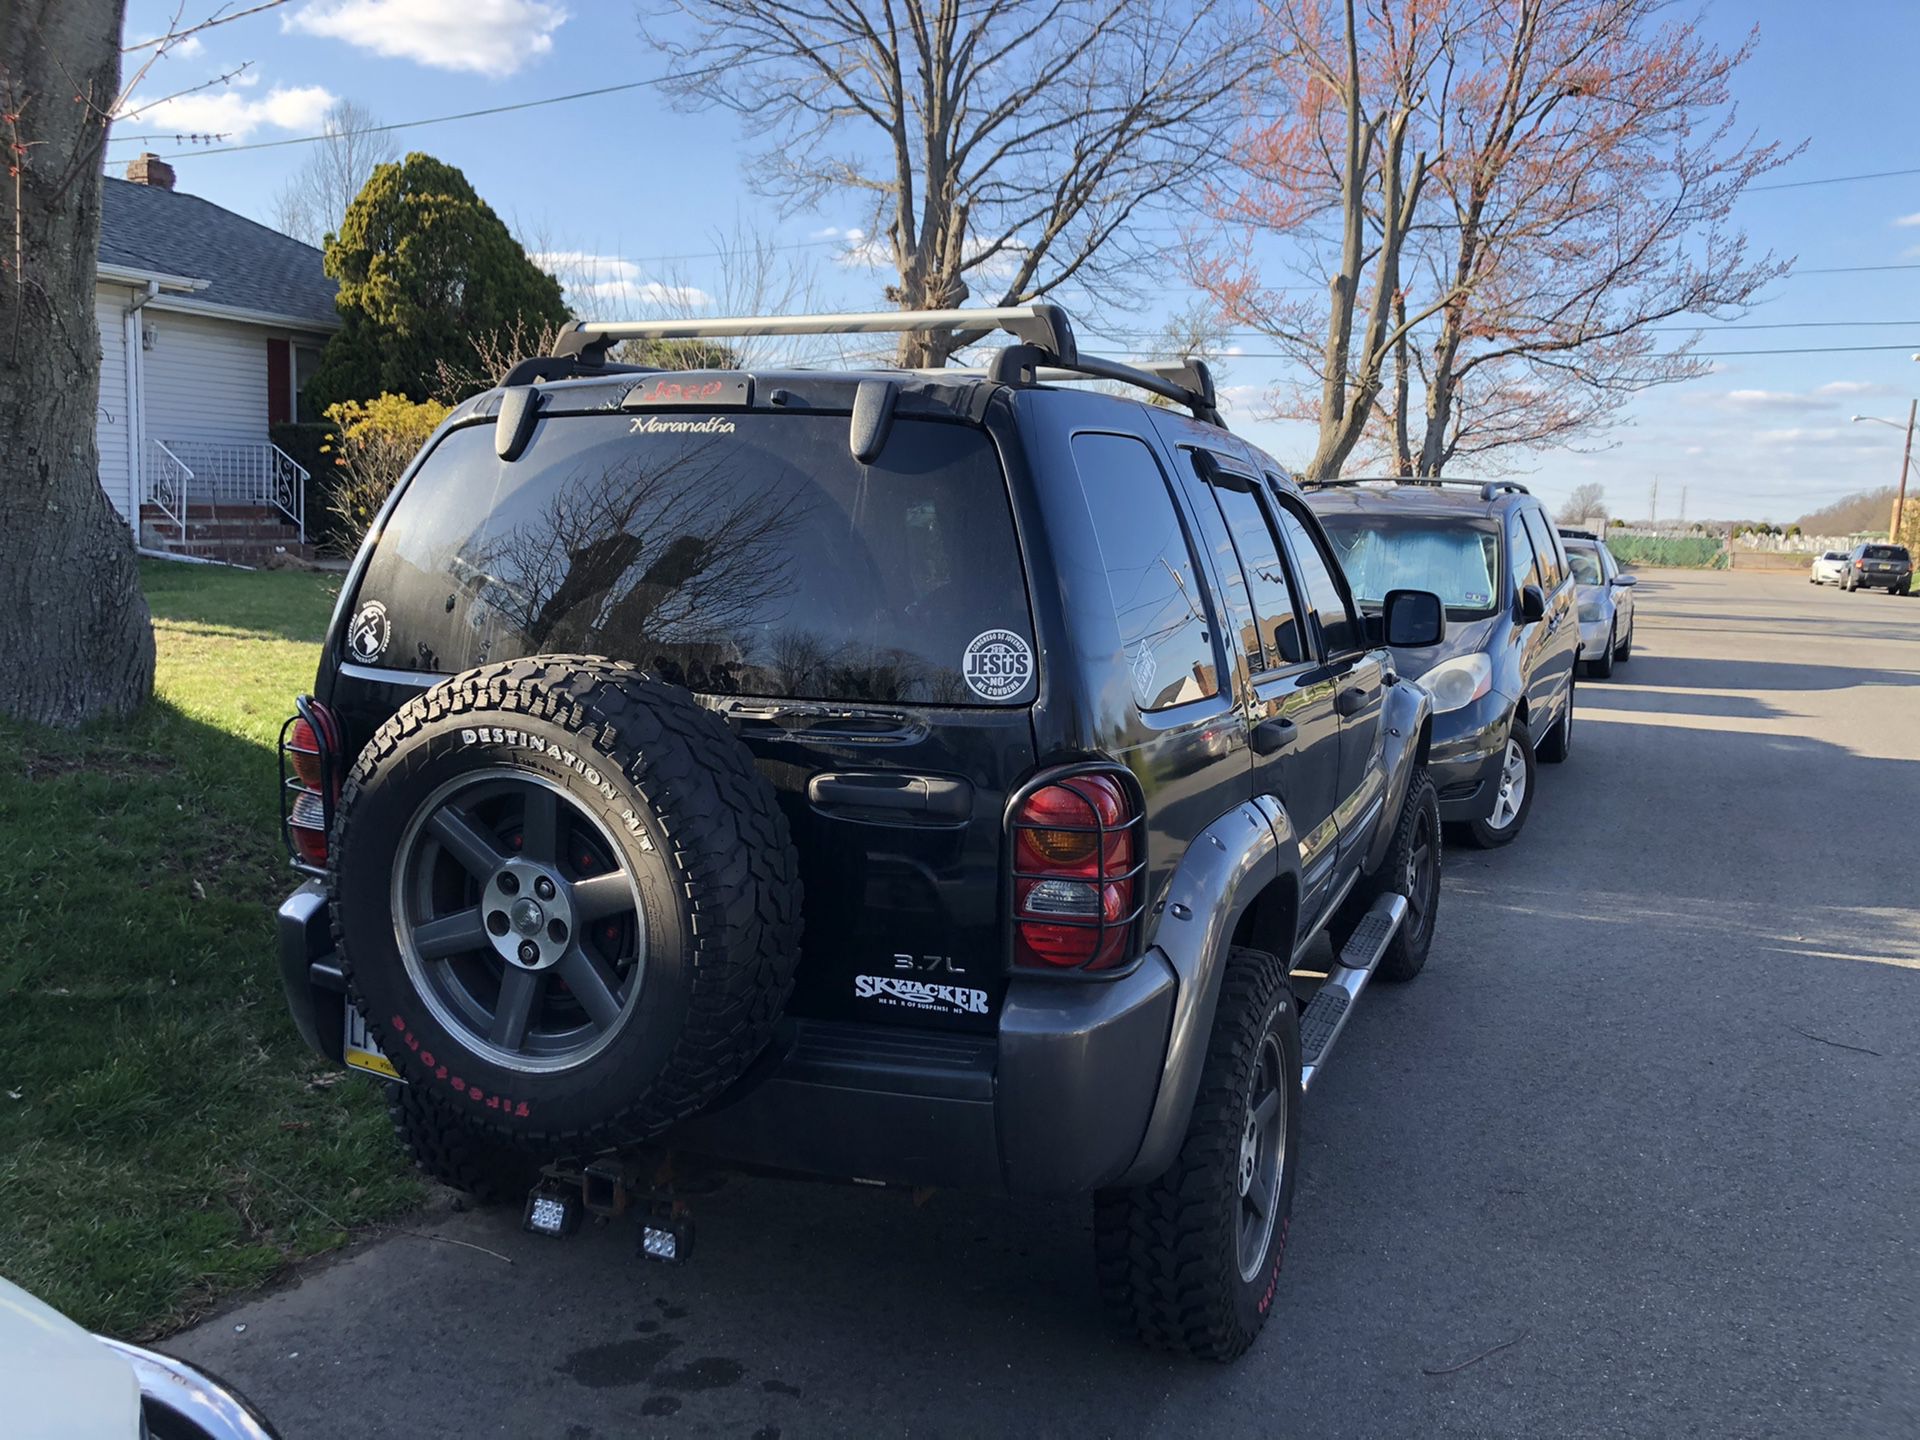 2003 Jeep Liberty for parts with 2” lift kit (part out)